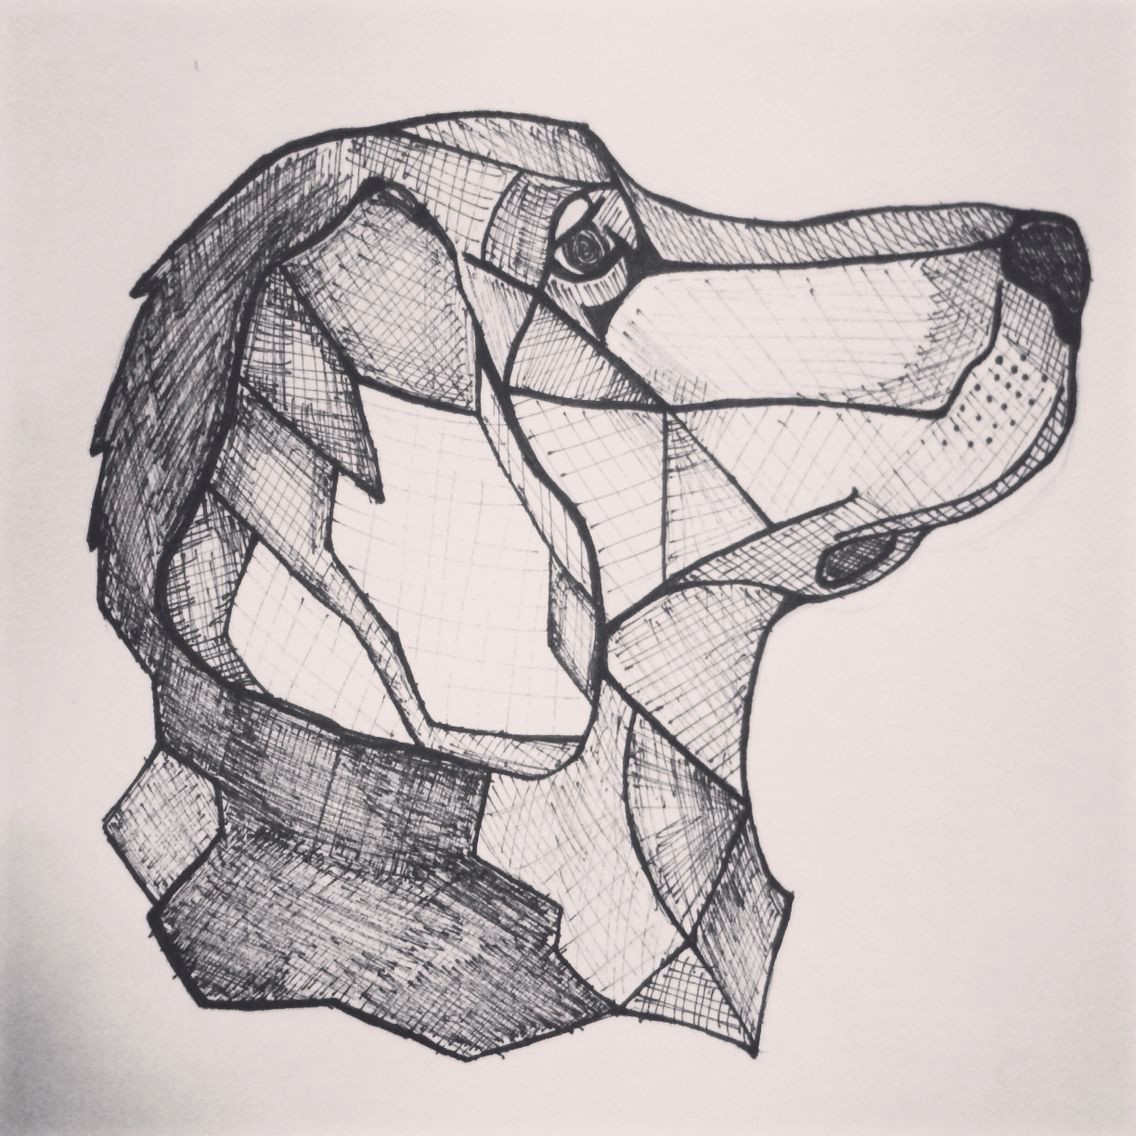 i decided to try drawing my golden retriever in a similar style